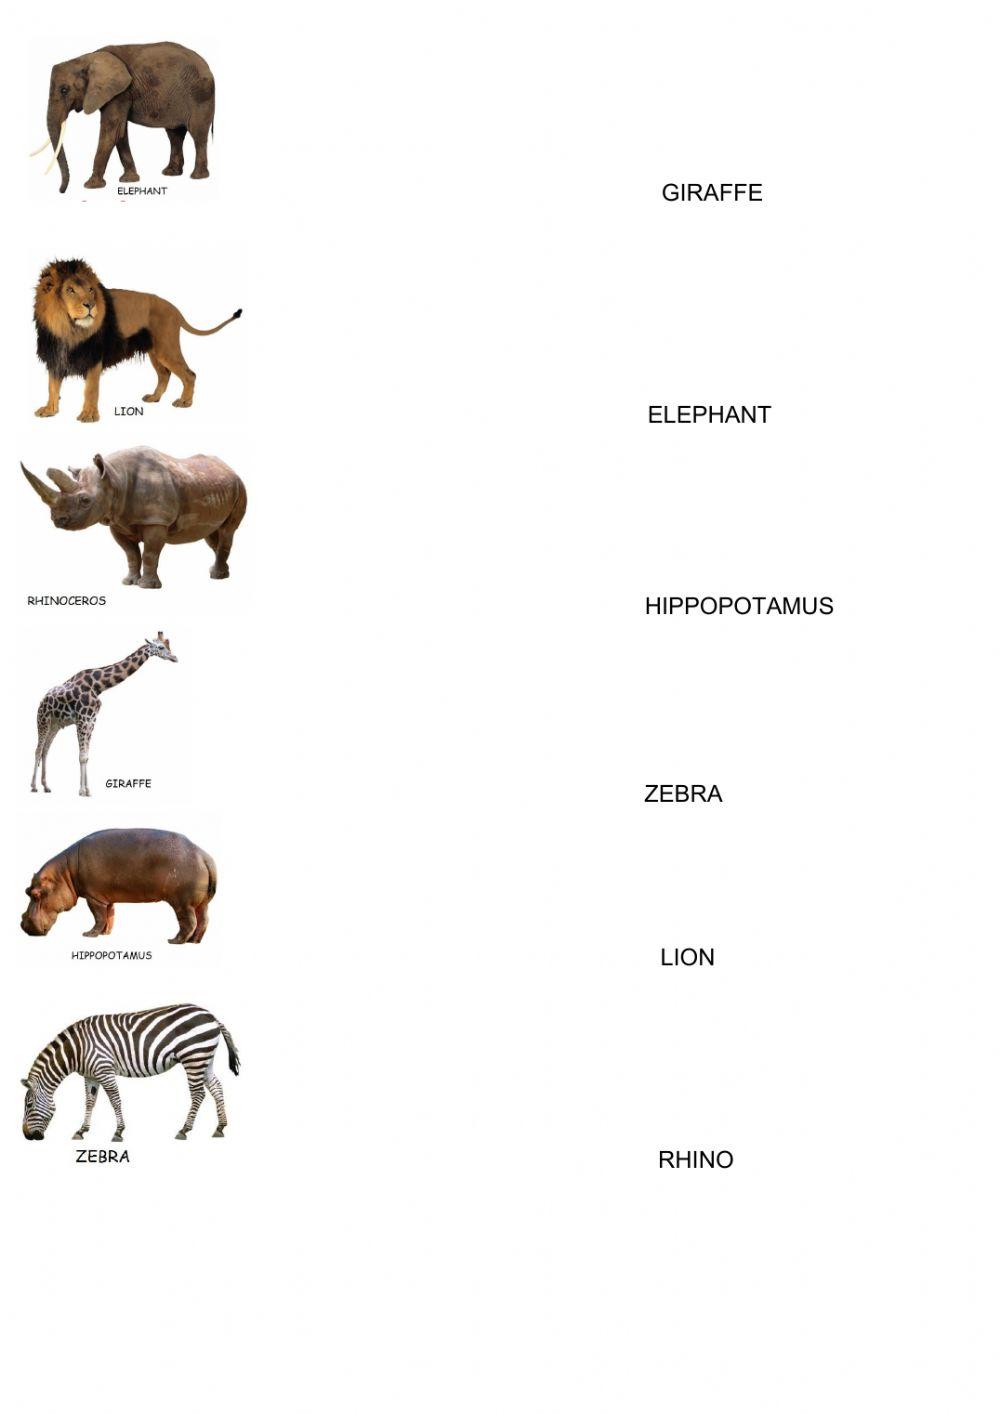 Match the animal with its name